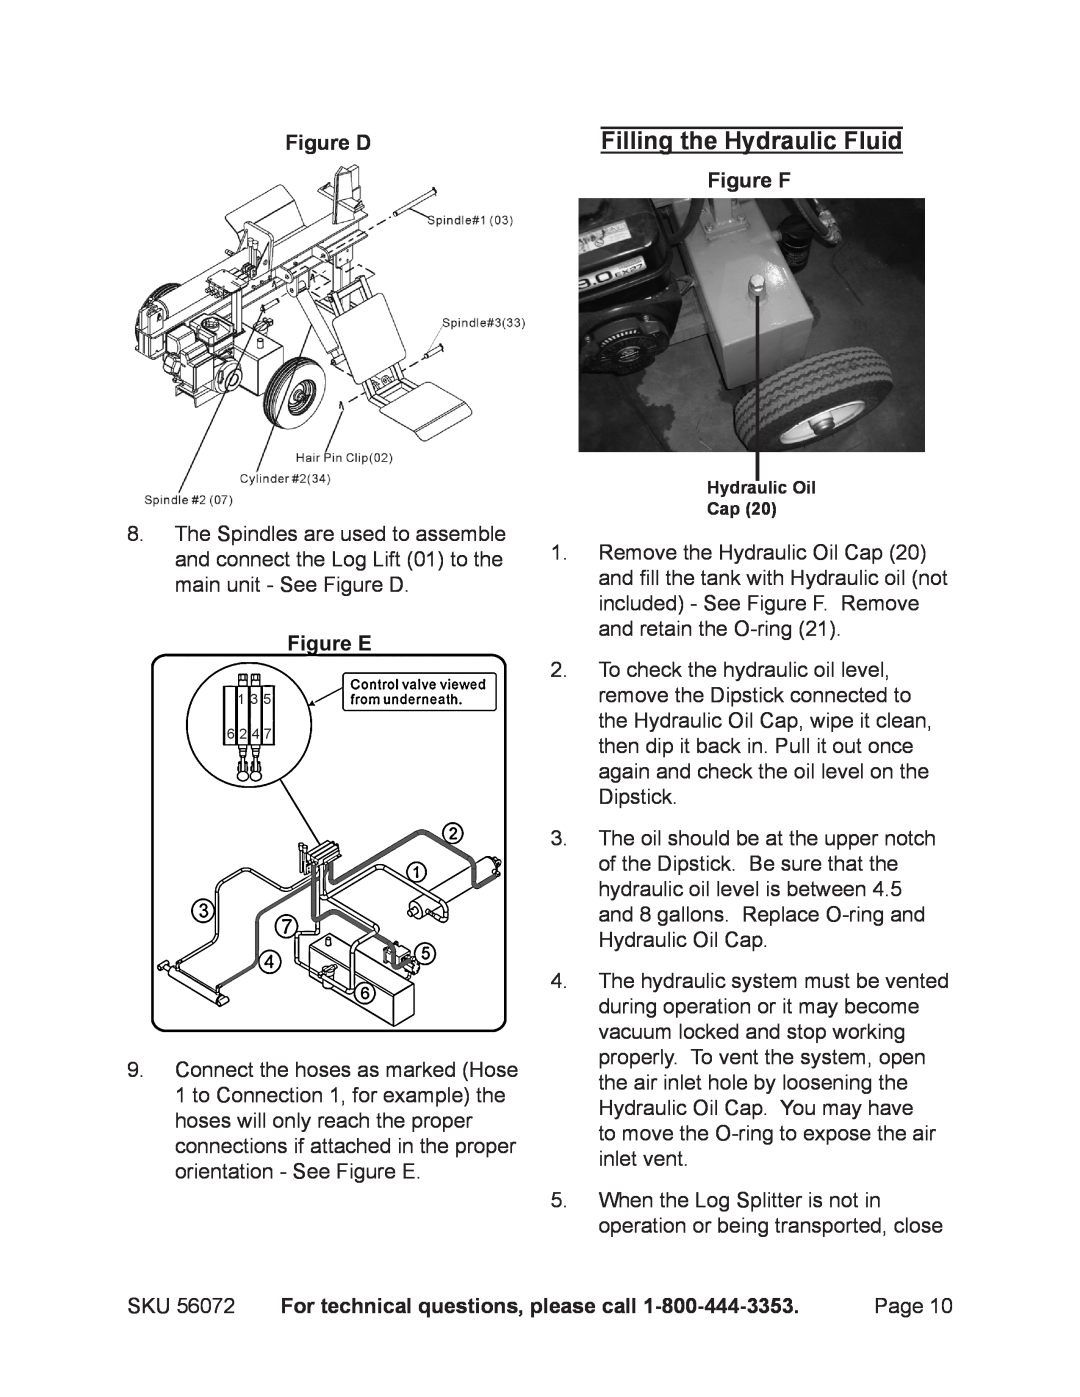 Harbor Freight Tools 56072 manual Filling the Hydraulic Fluid, Figure D, Figure F, For technical questions, please call 